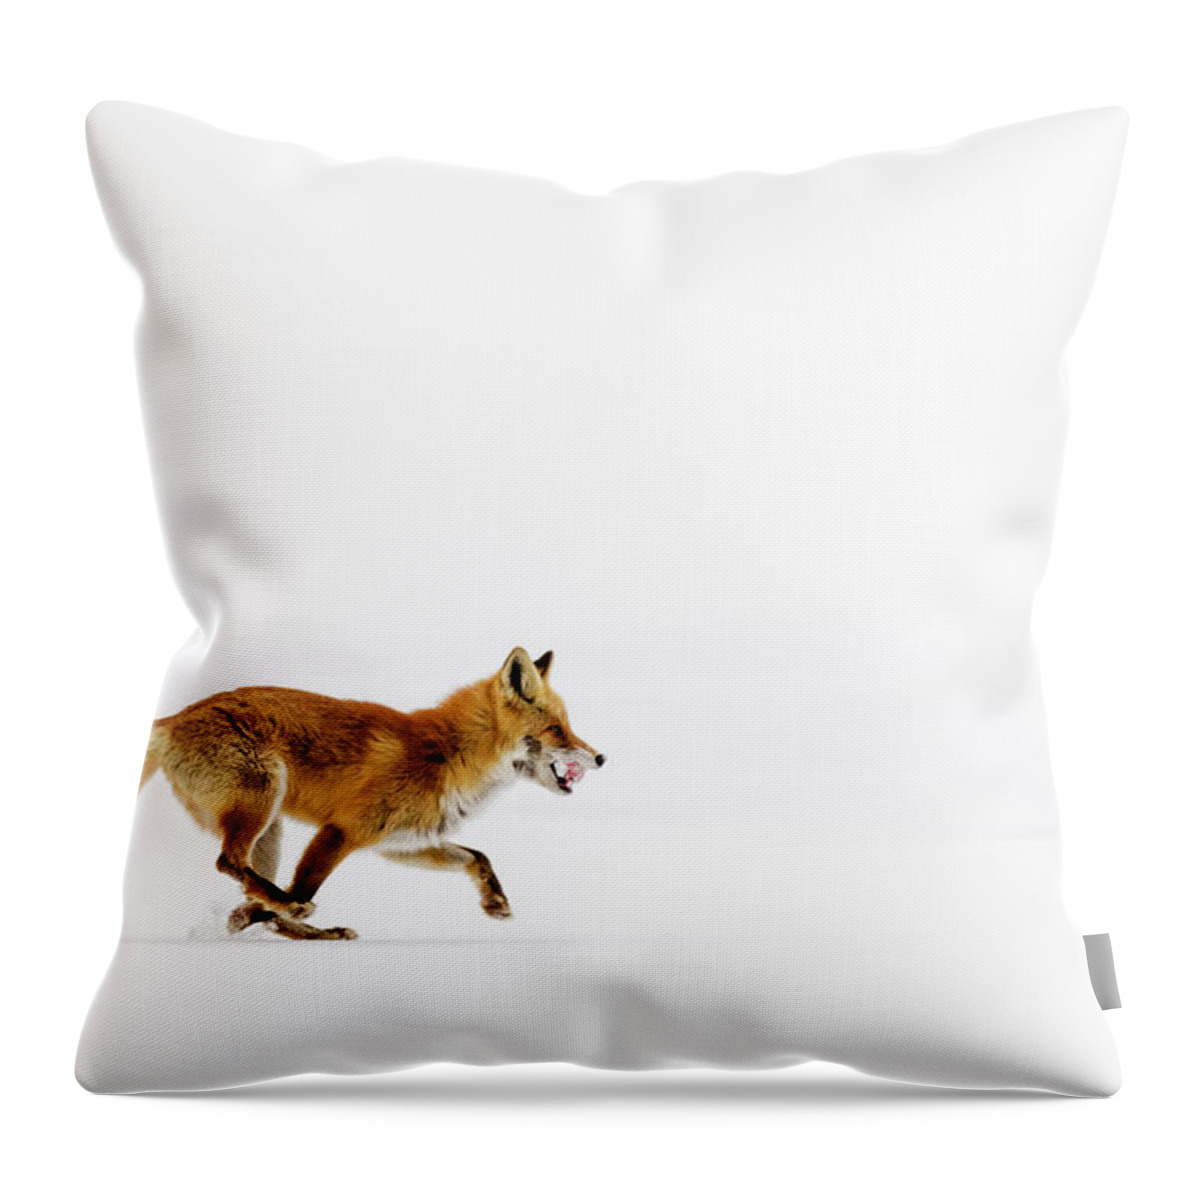 Hokkaido Throw Pillow featuring the photograph Red Fox Running In Snowy Landscape by Pixelchrome Inc